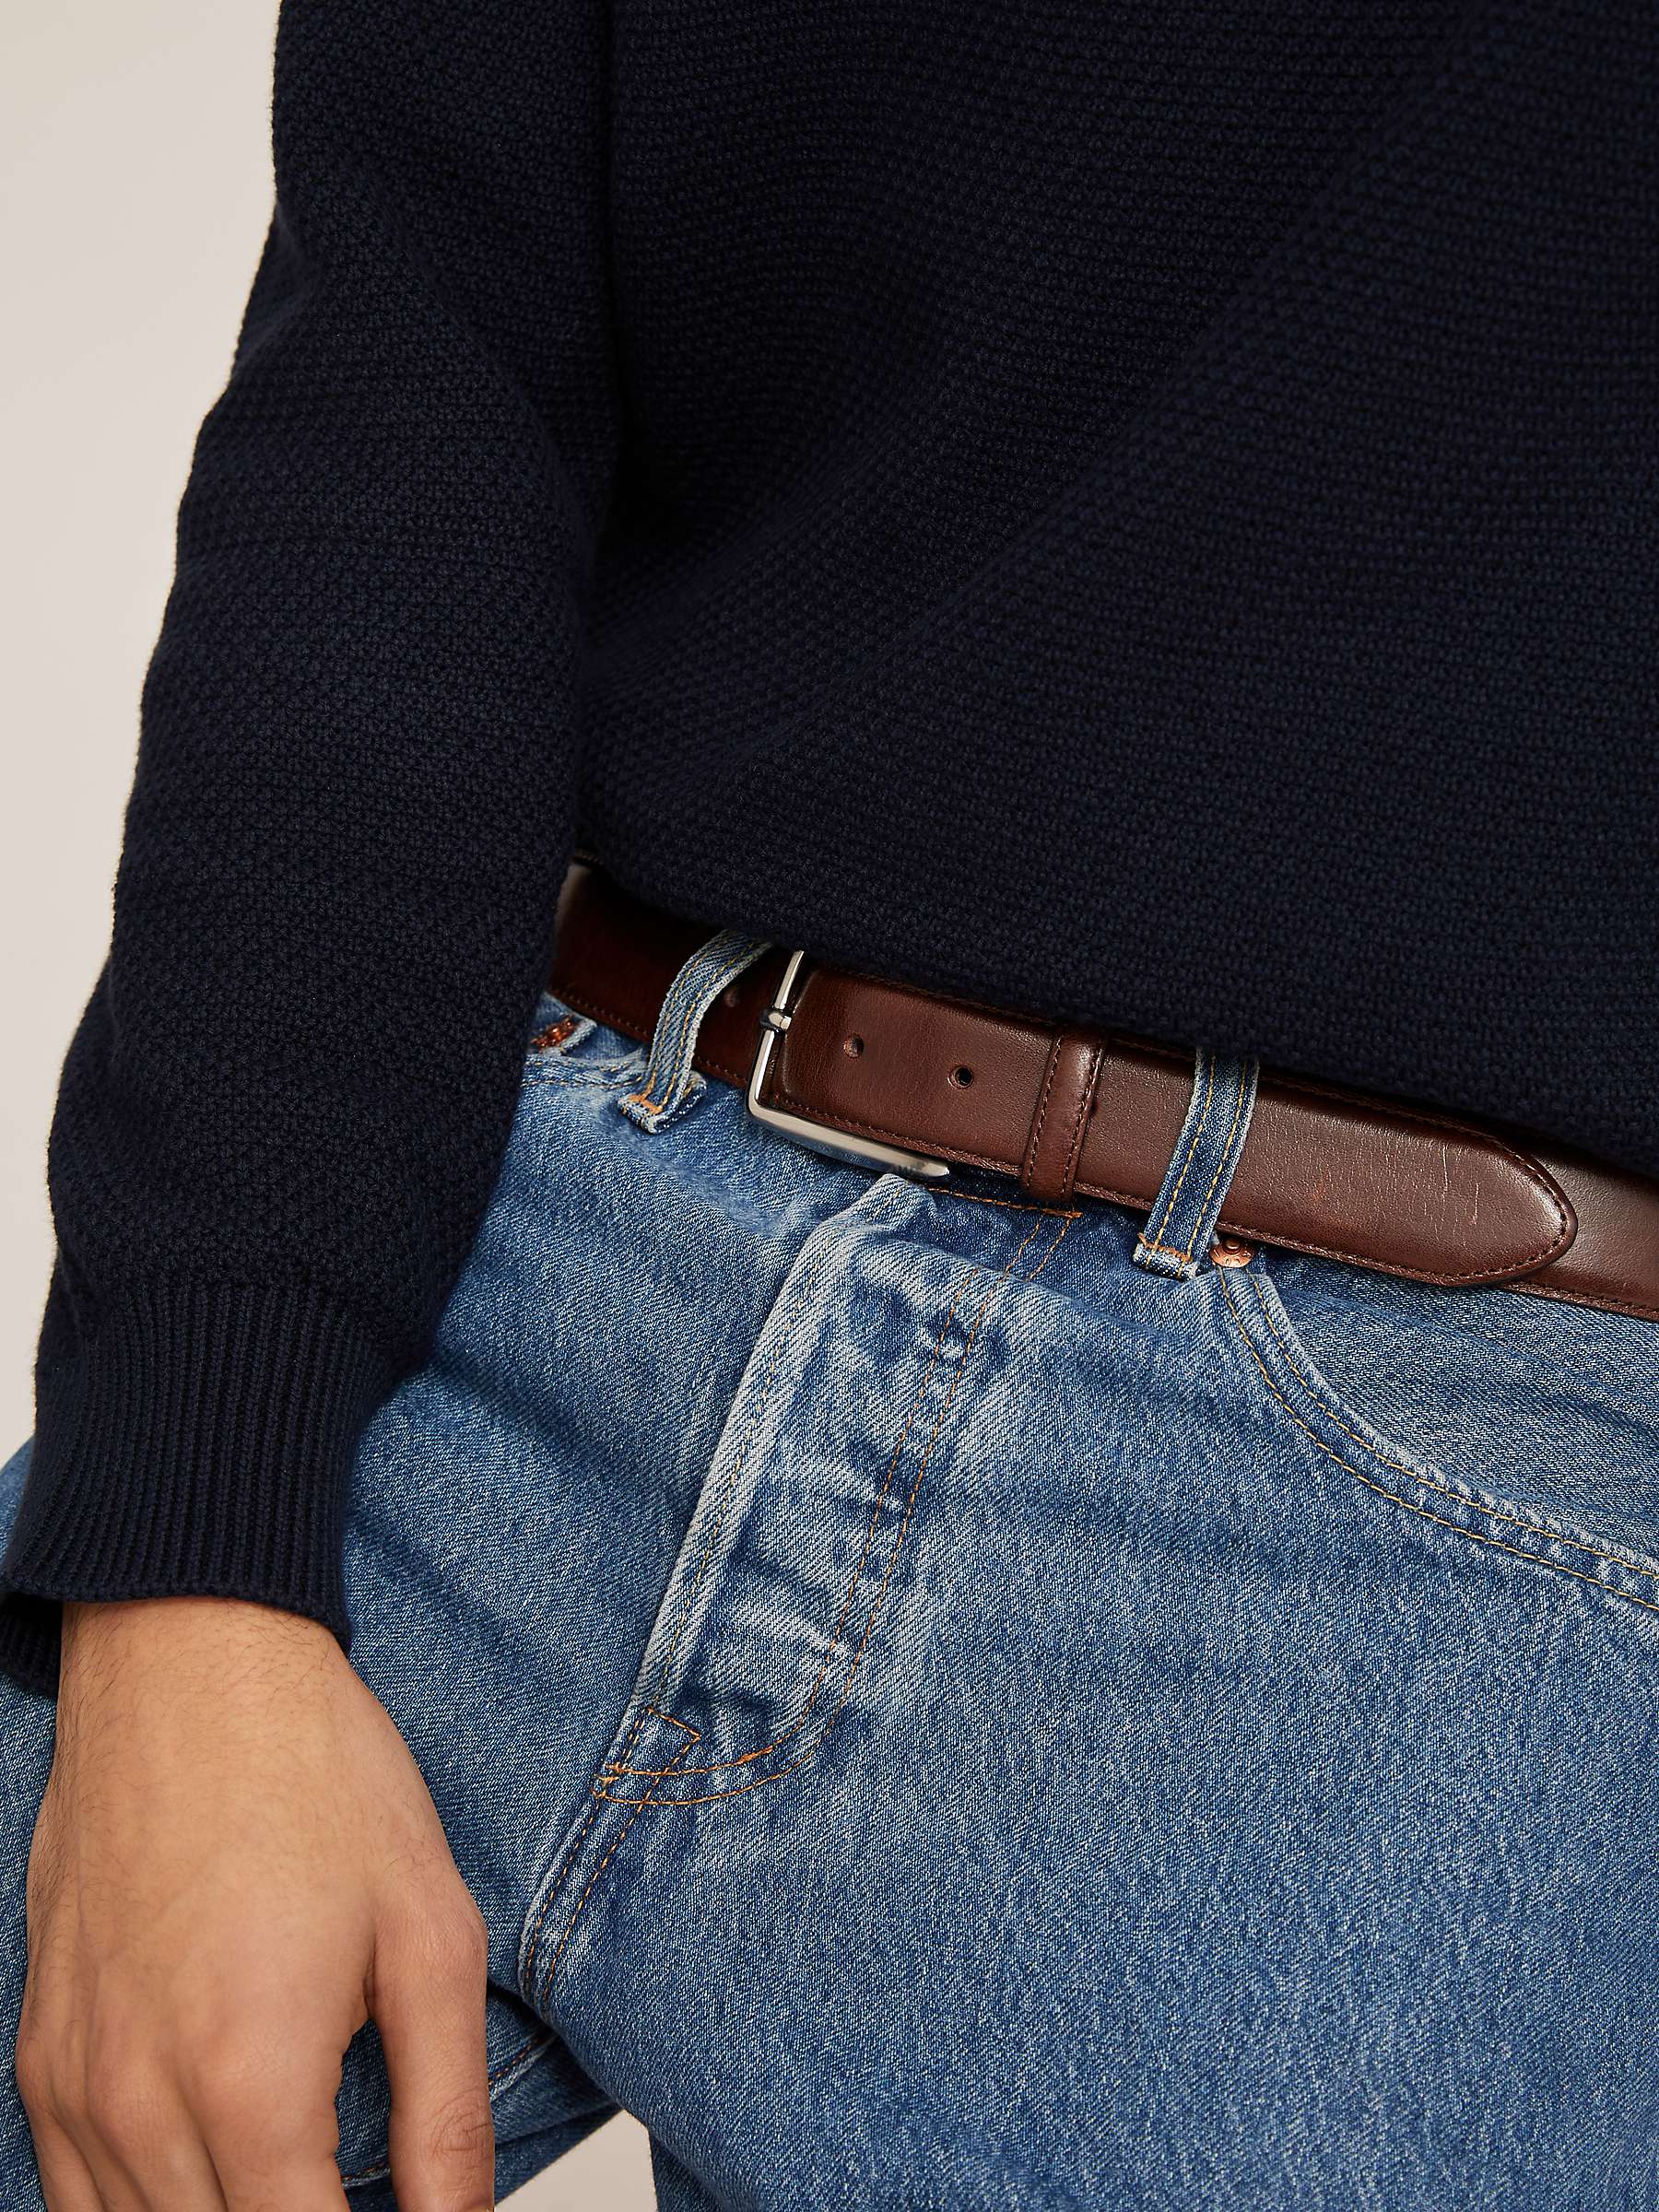 Buy John Lewis Made in Italy 35mm Stitched Leather Belt Online at johnlewis.com